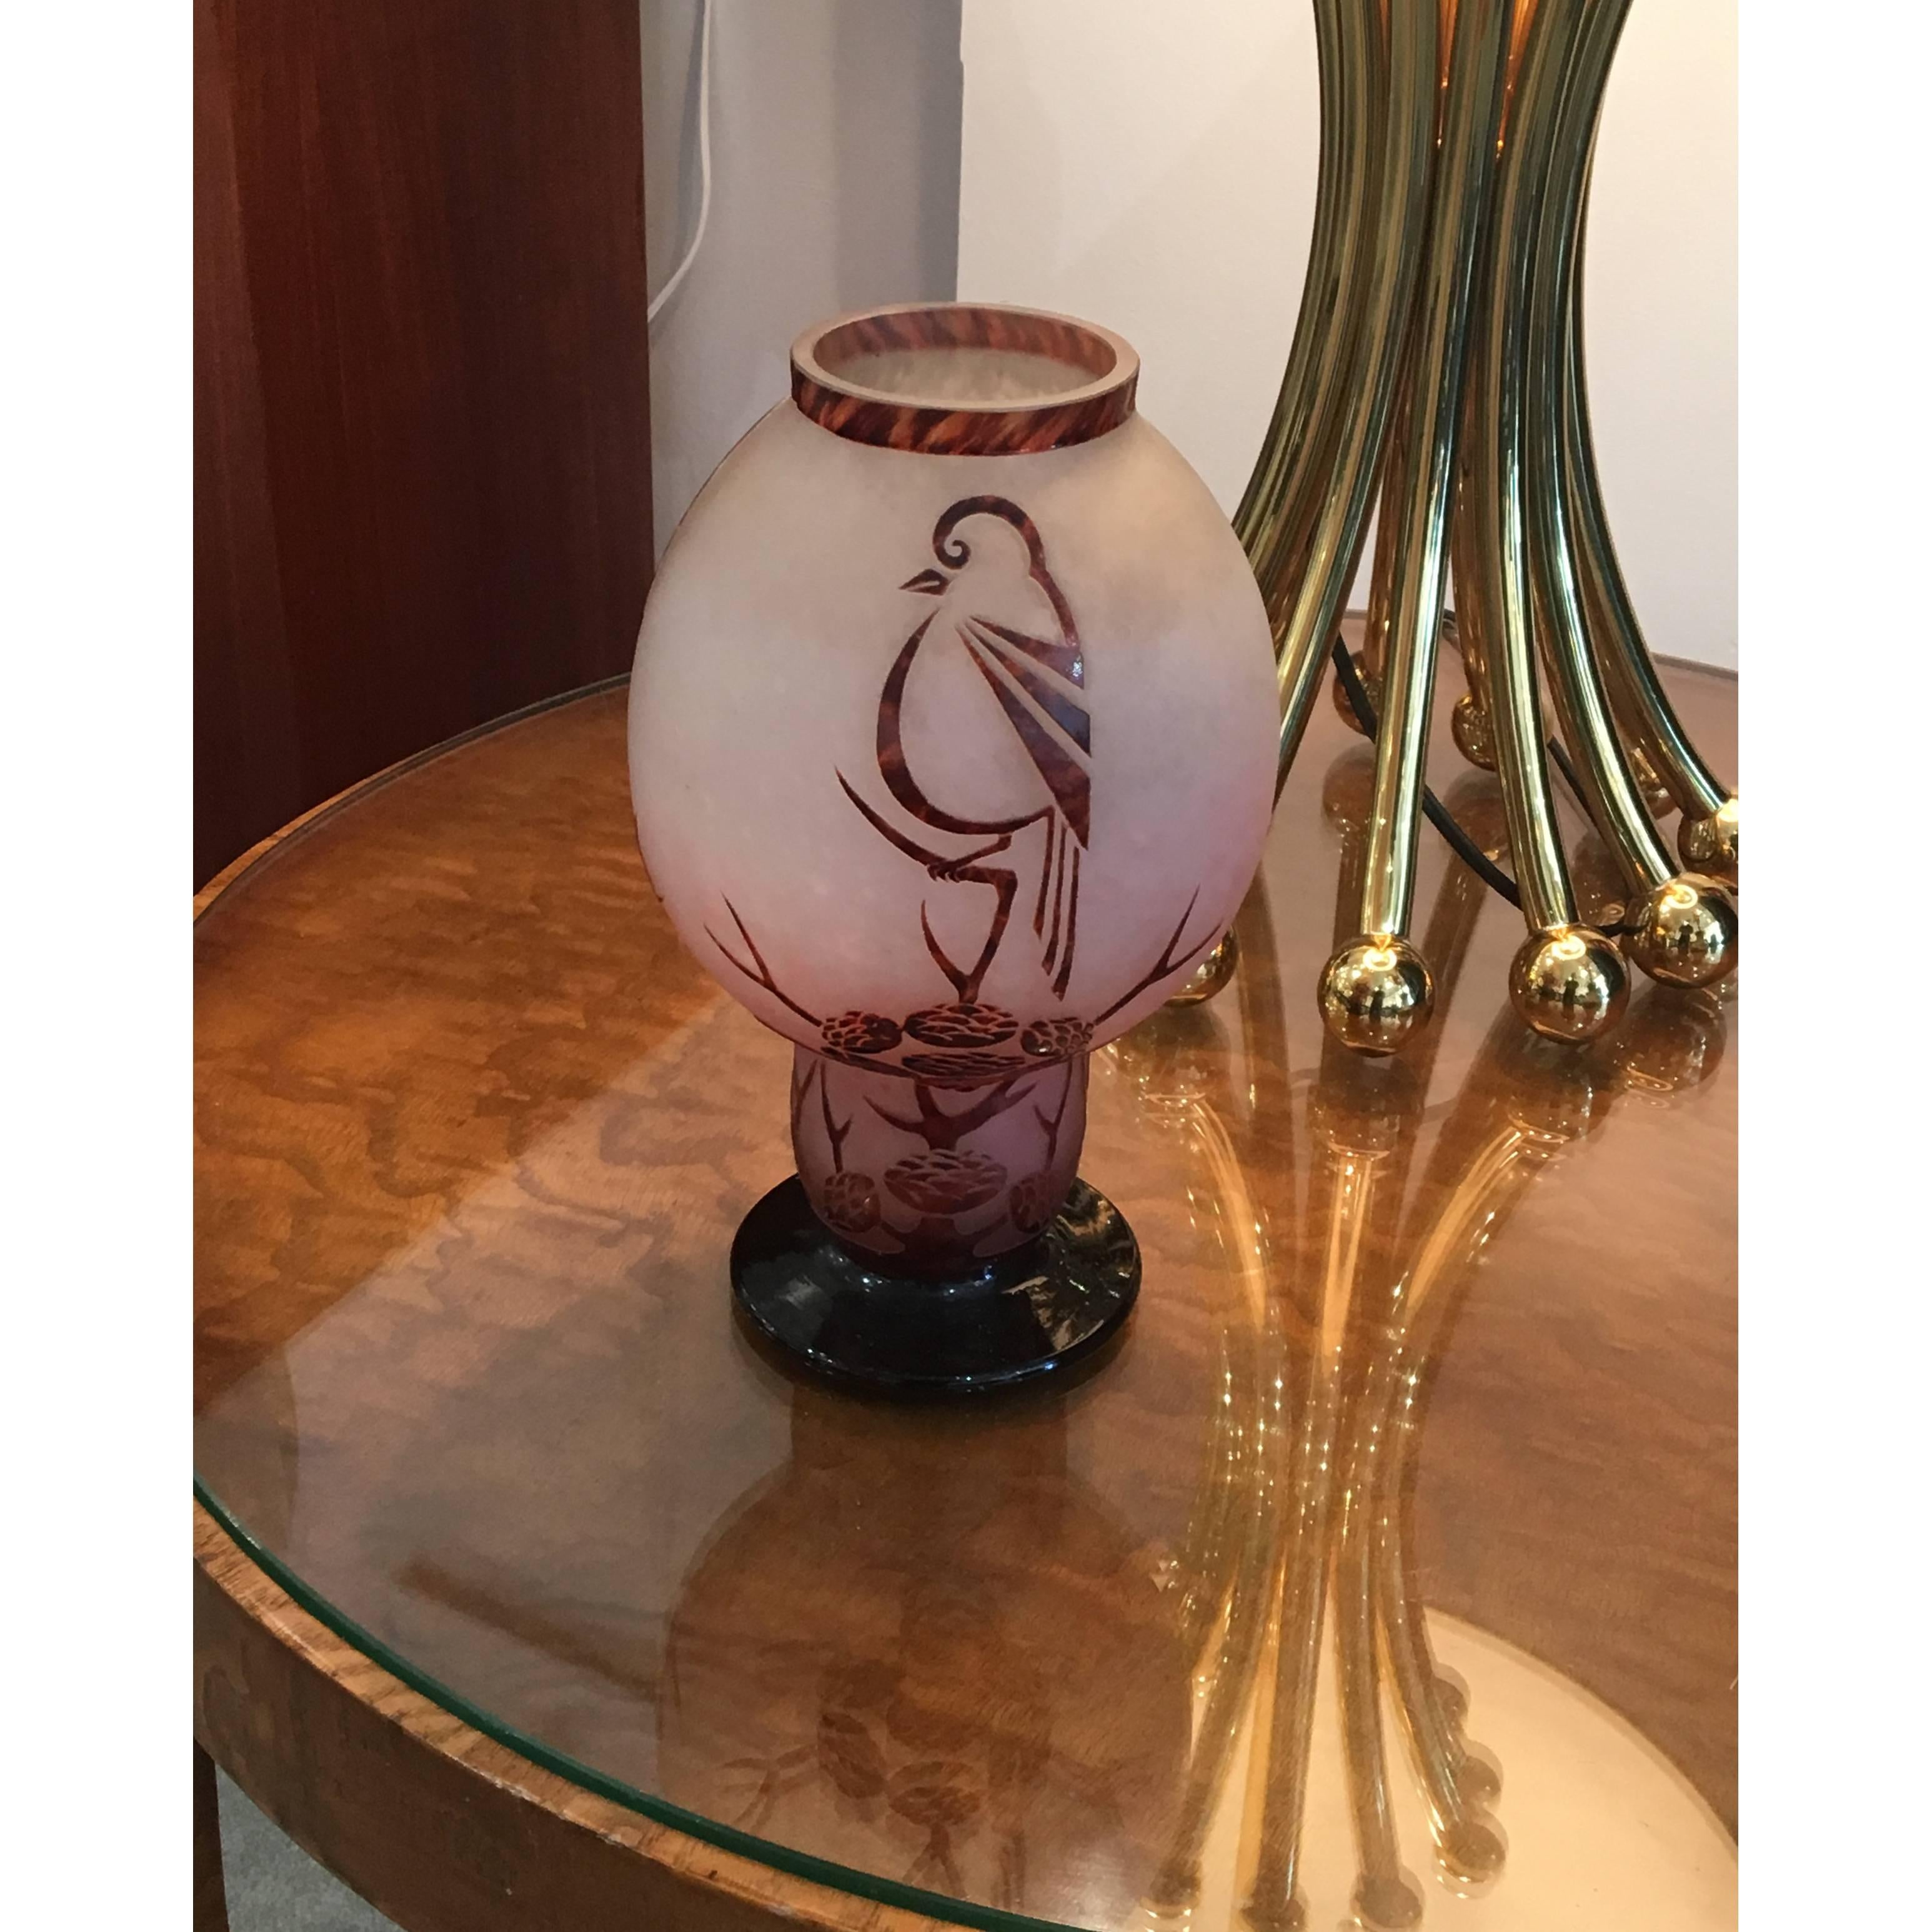 Beautiful Art Deco decorative glass vase by Le Verre Francais under the artistic direction of Charles Schneider; the piece has been acid-etched and wheel carved to depict the Pinsons bird pattern.
Made in France,
circa 1927.
Signature: Charder -